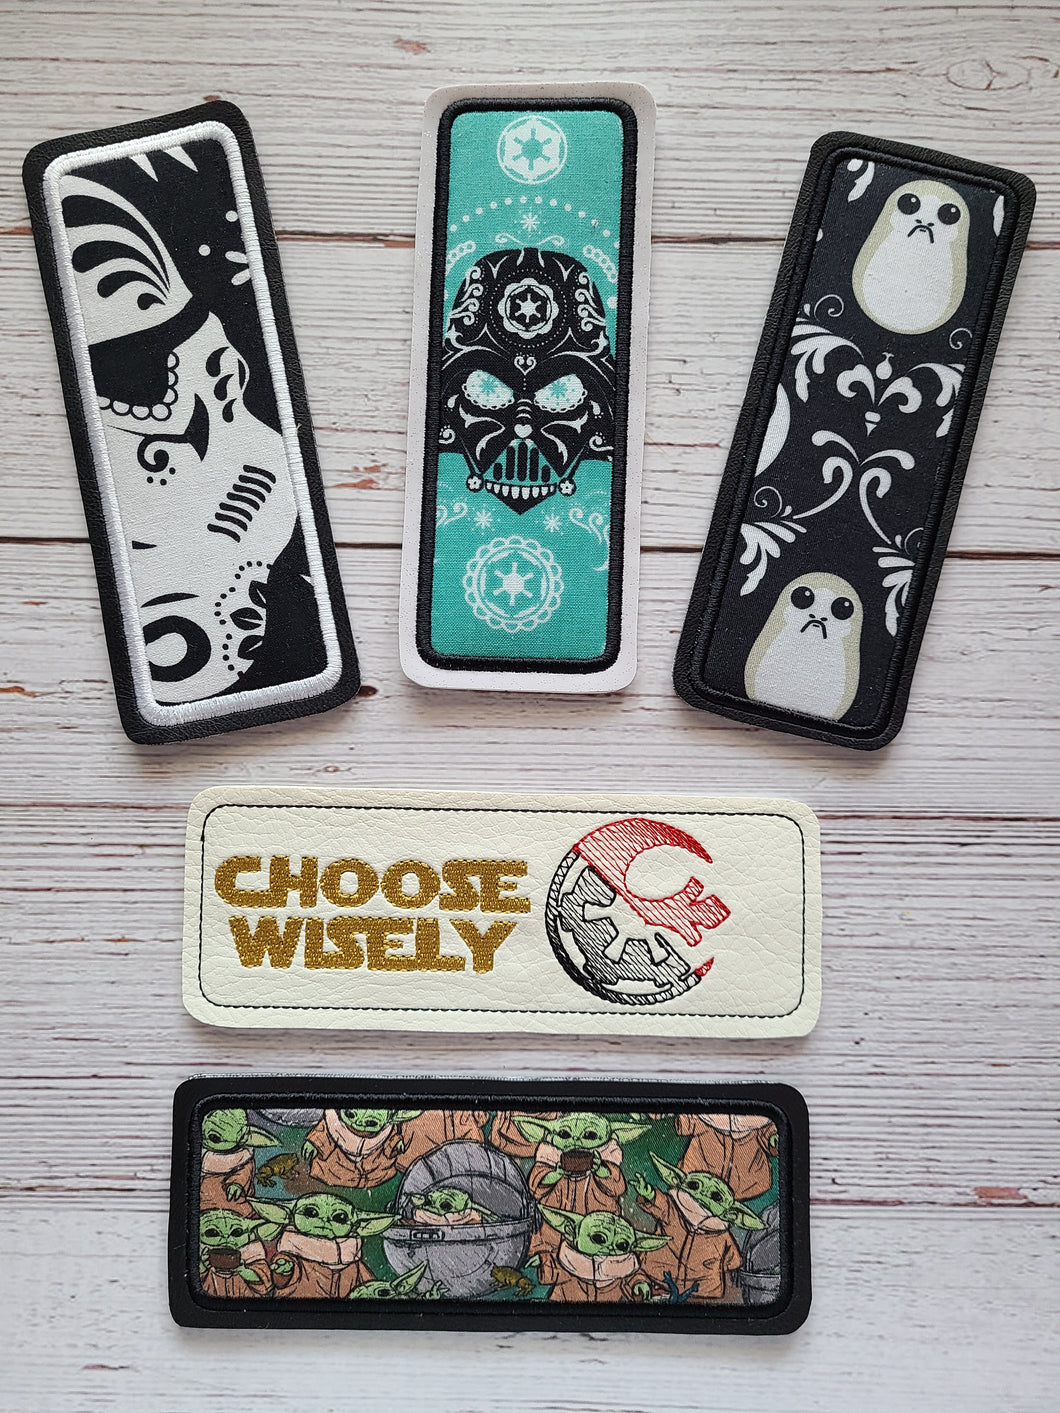 Embroidered Bookmarks - Geeky - Nerdy - Snarky - Silly - Whitty - Funny Bookmarks - Choose Wisely